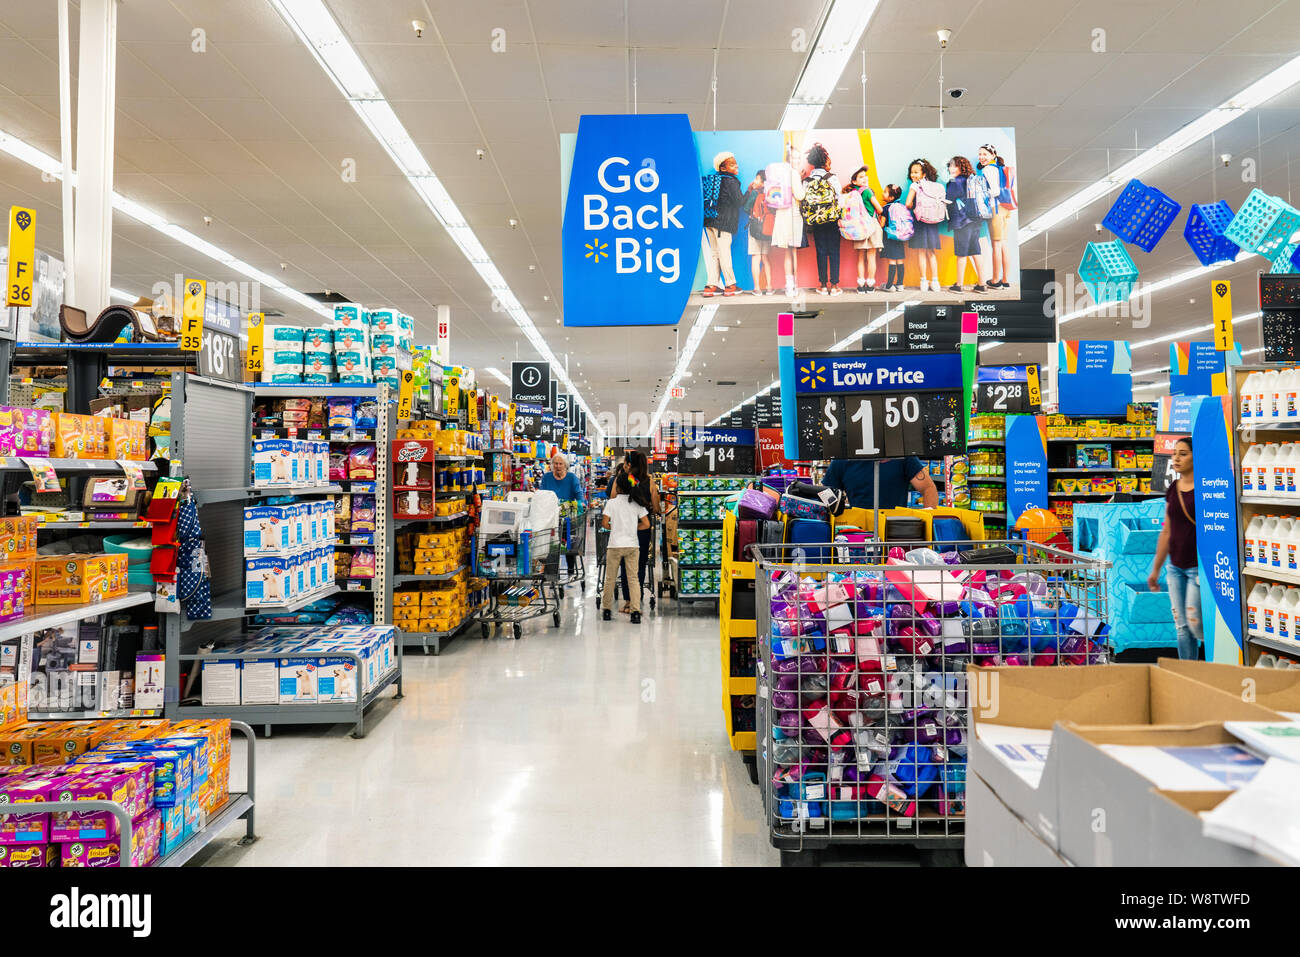 August 8, 2019 Mountain View / CA / USA - Aisle in one of Walmart's stores in south San Francisco bay area; Go Back big banner advertising the back to Stock Photo